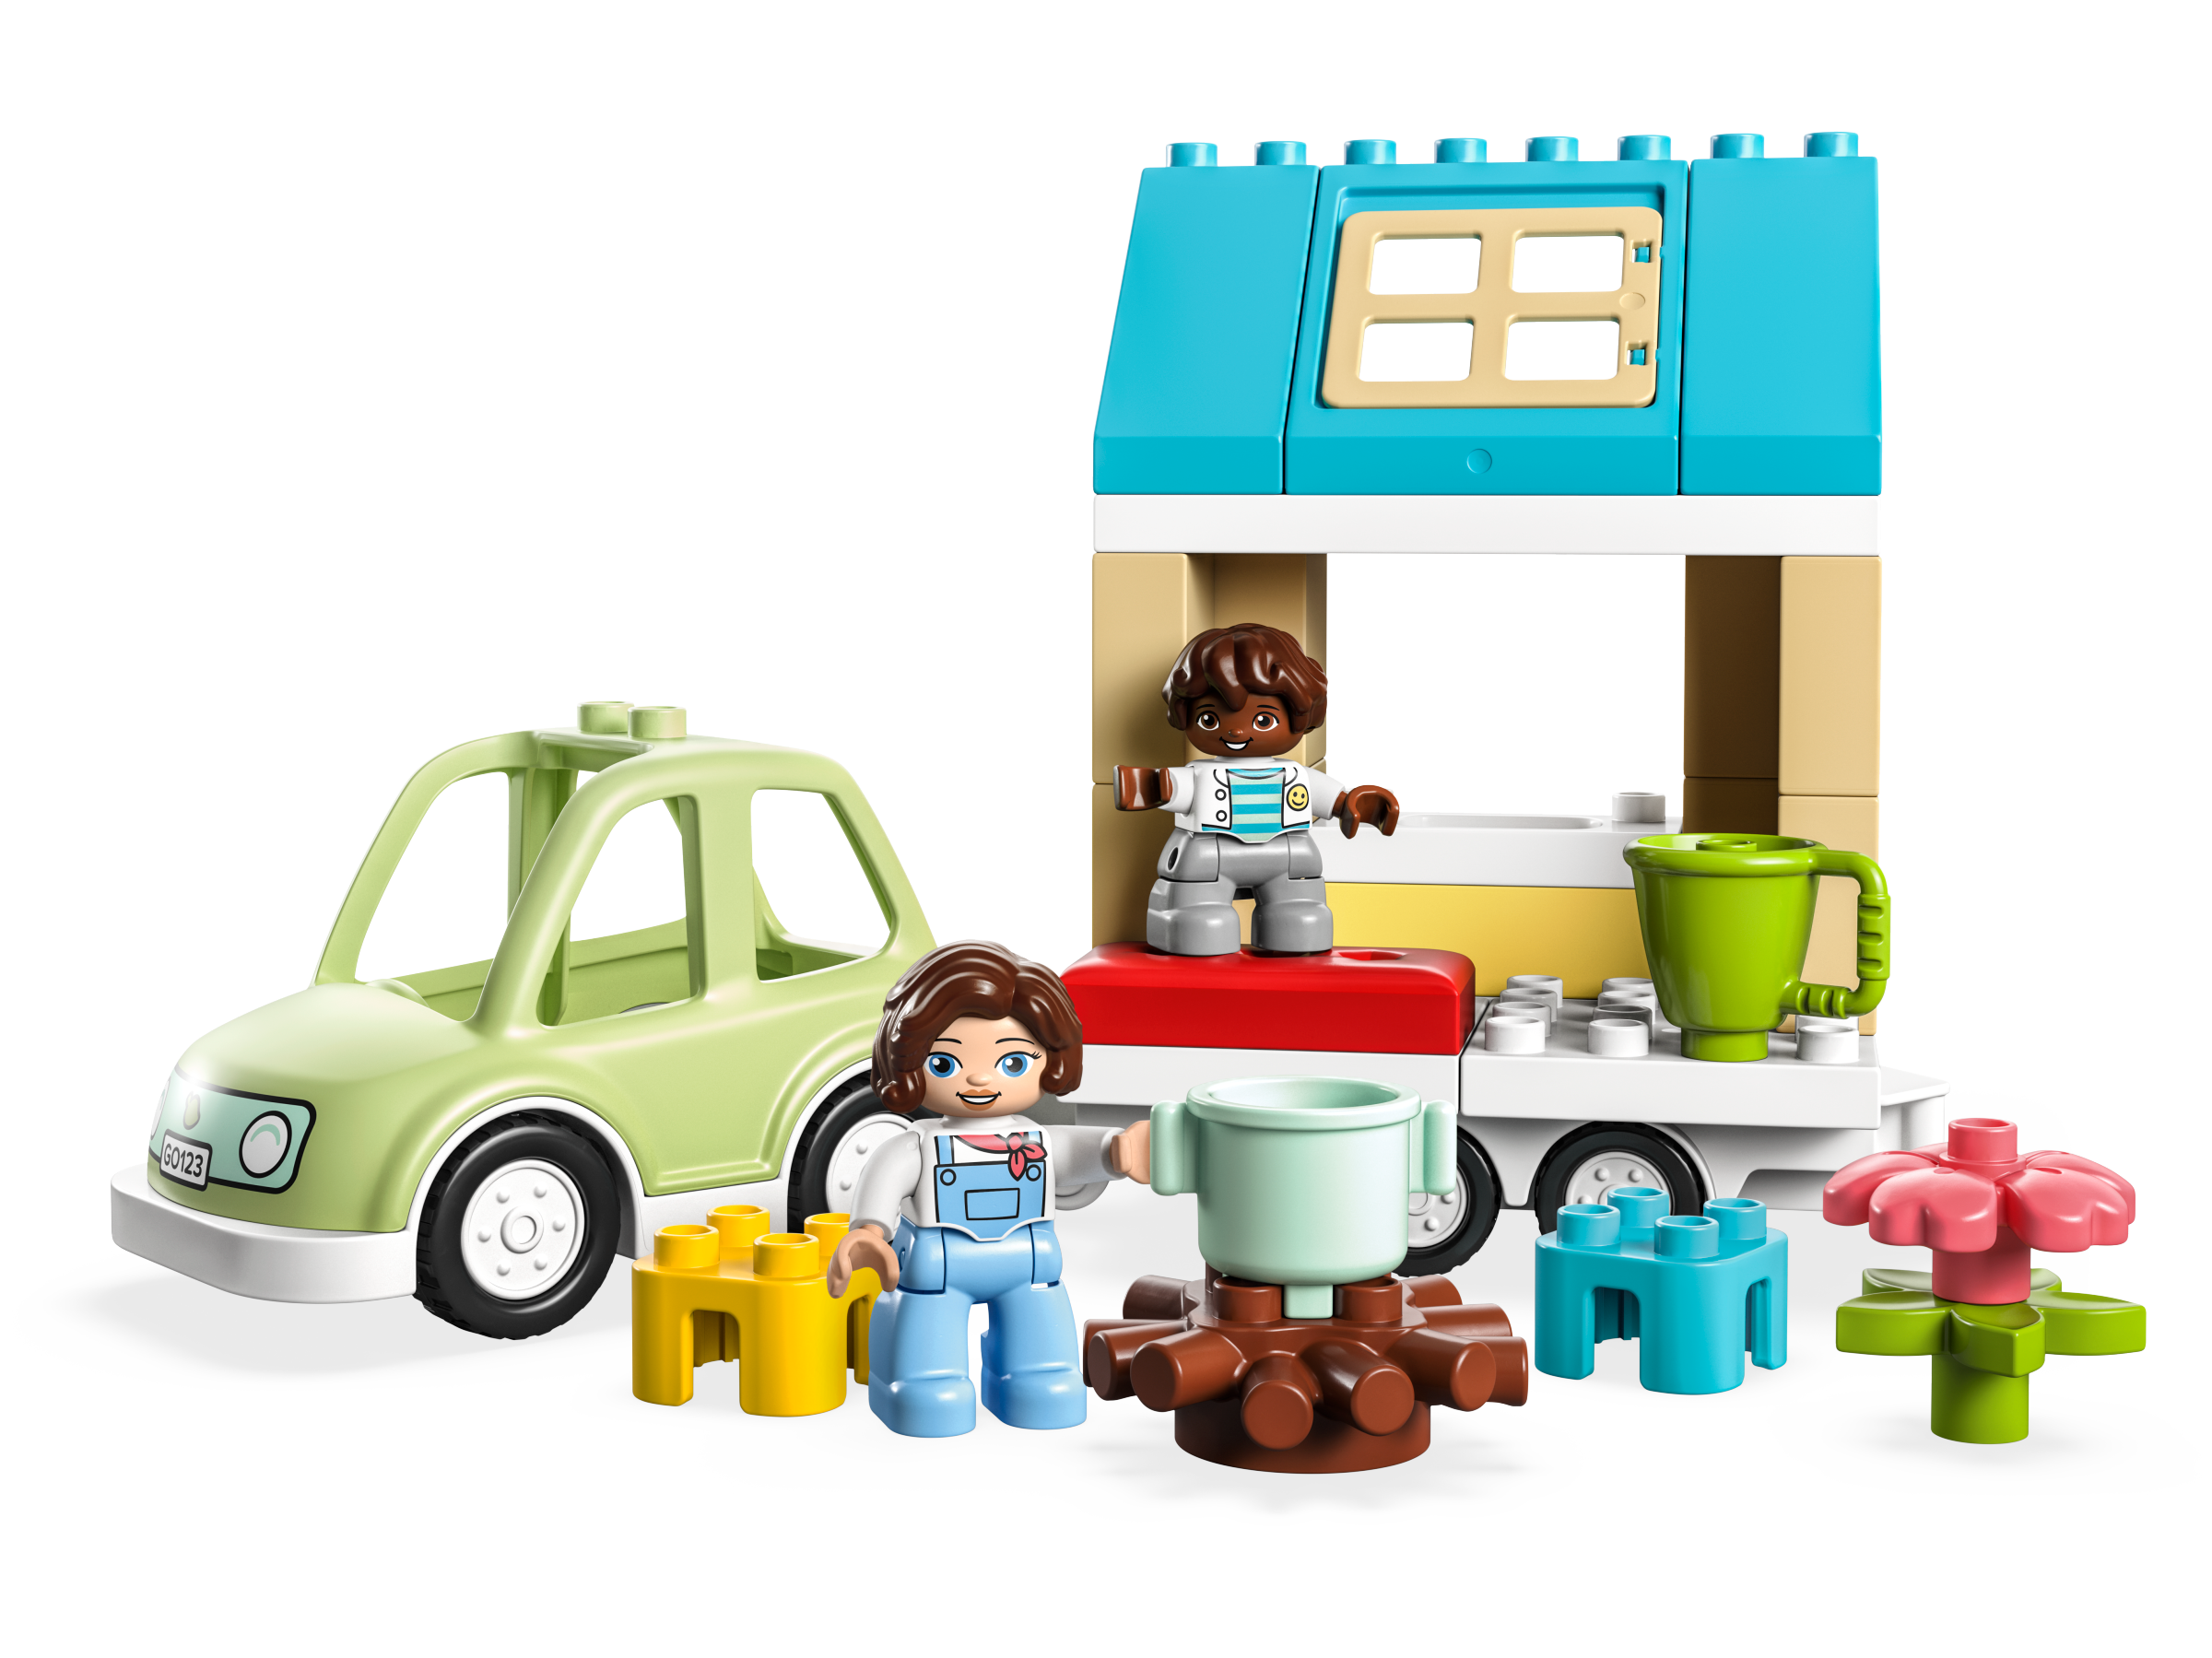 zweep Luipaard Meer Family House on Wheels 10986 | DUPLO® | Buy online at the Official LEGO®  Shop US